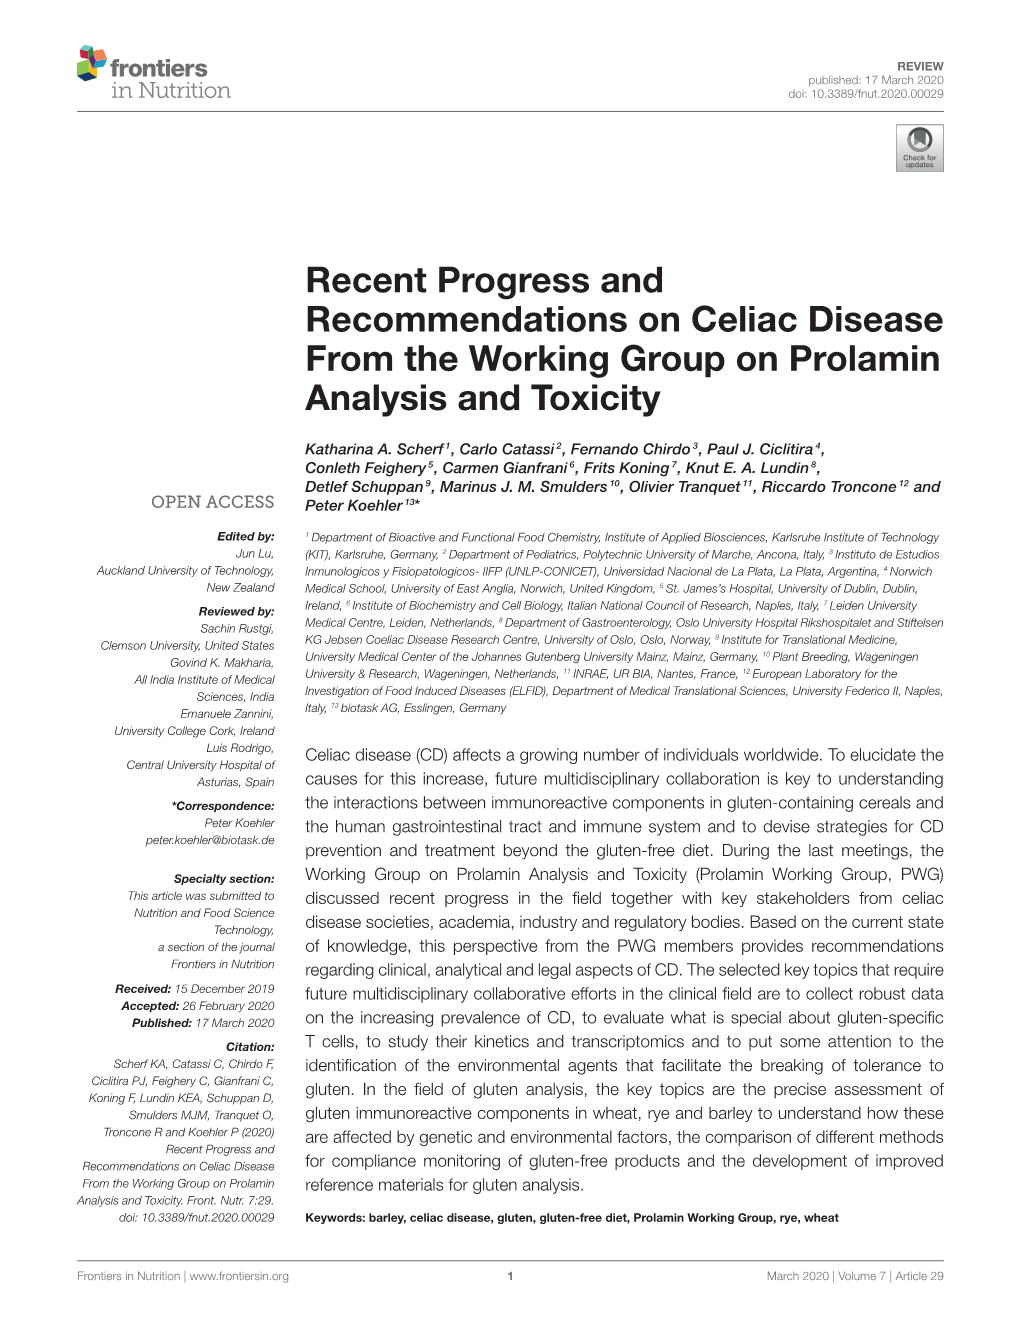 Recent Progress and Recommendations on Celiac Disease from the Working Group on Prolamin Analysis and Toxicity